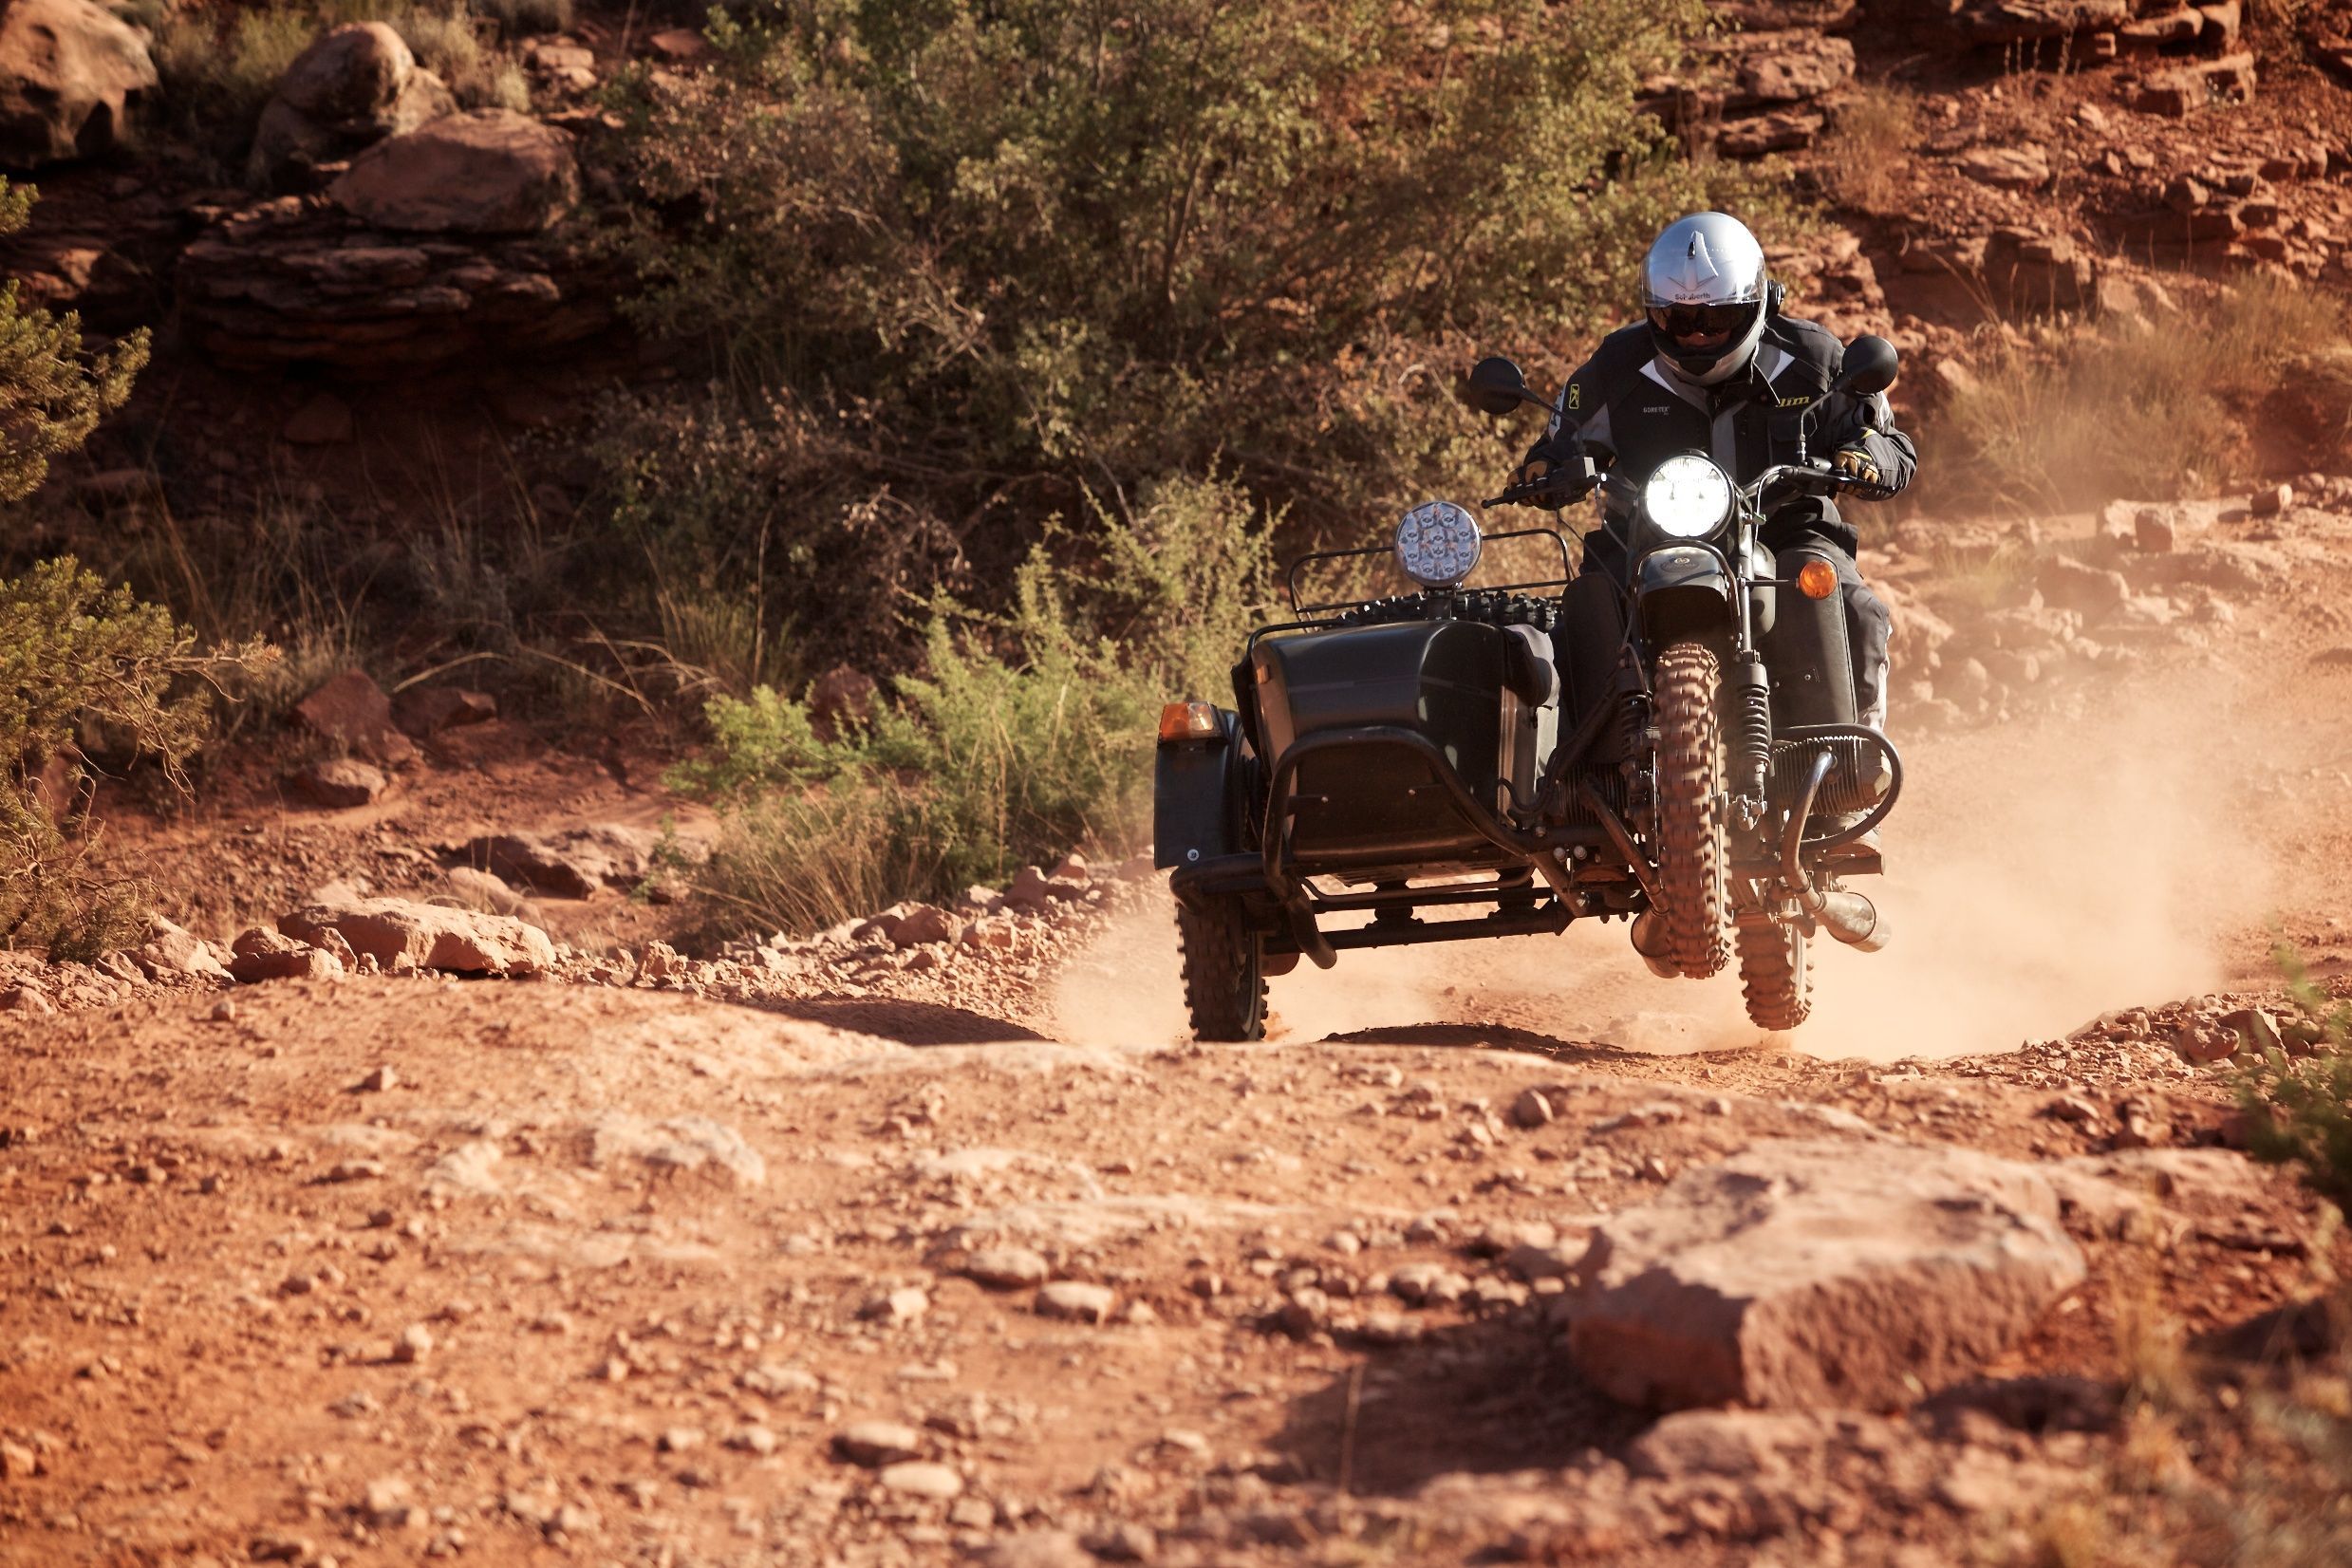 Here's How The 2021 Ural Gear Up Stands Against Off-Roading Competition